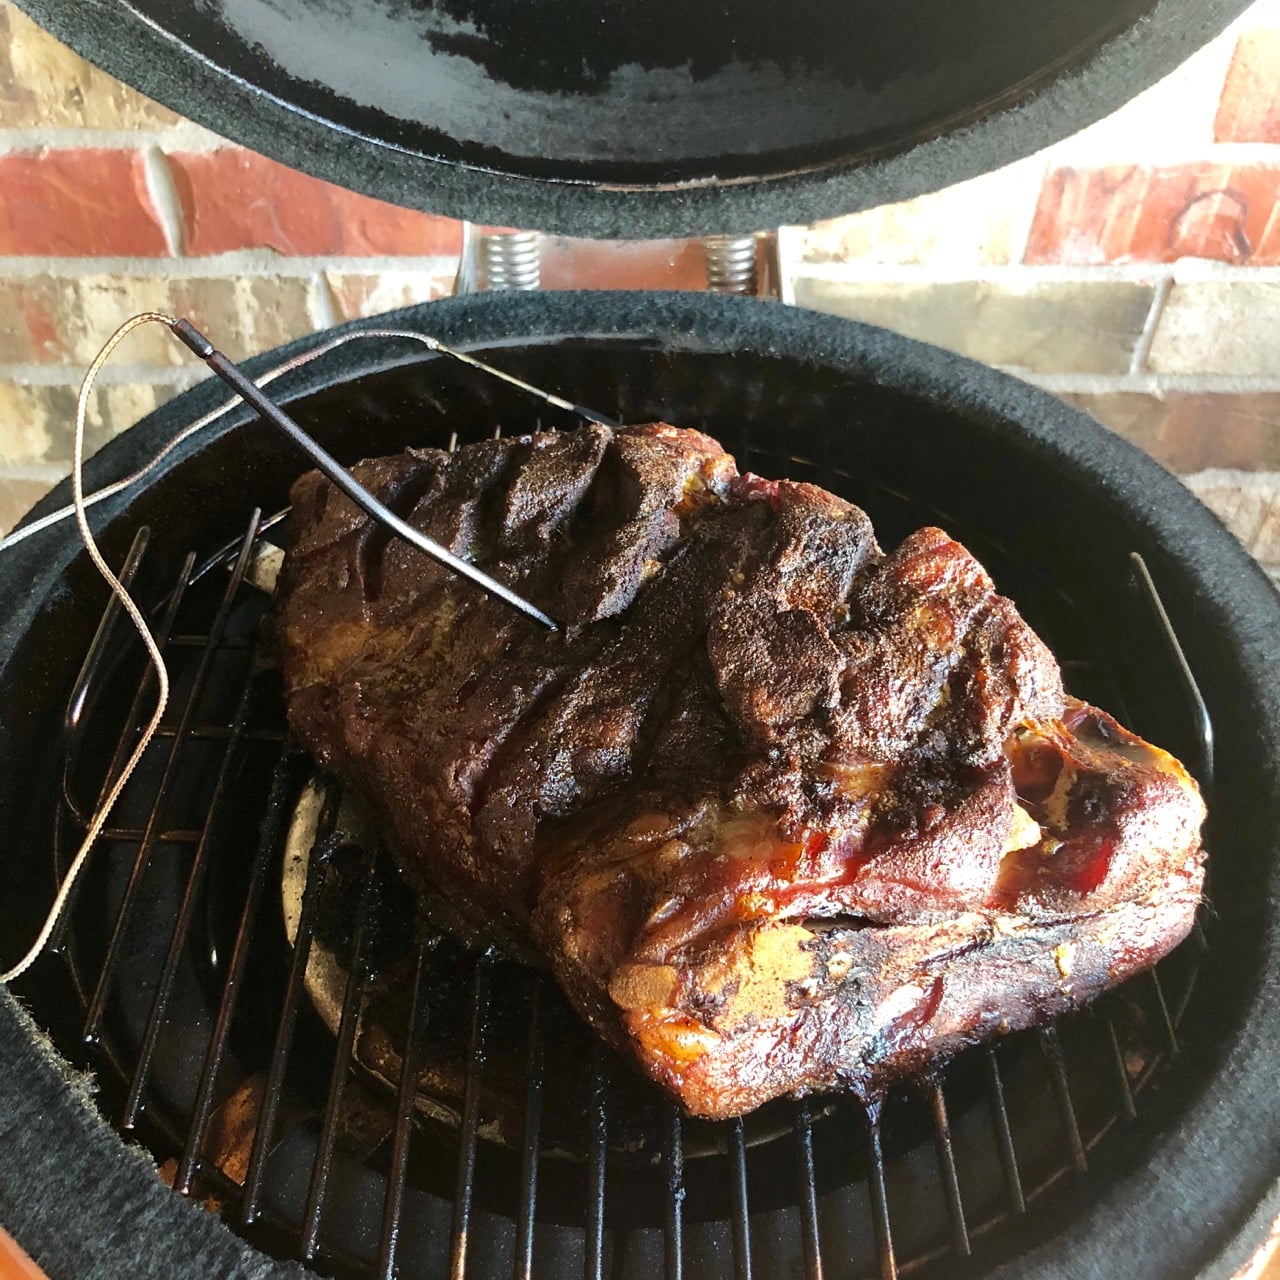 Quick review on the Vision Grills Cadet Kamado - The BBQ BRETHREN